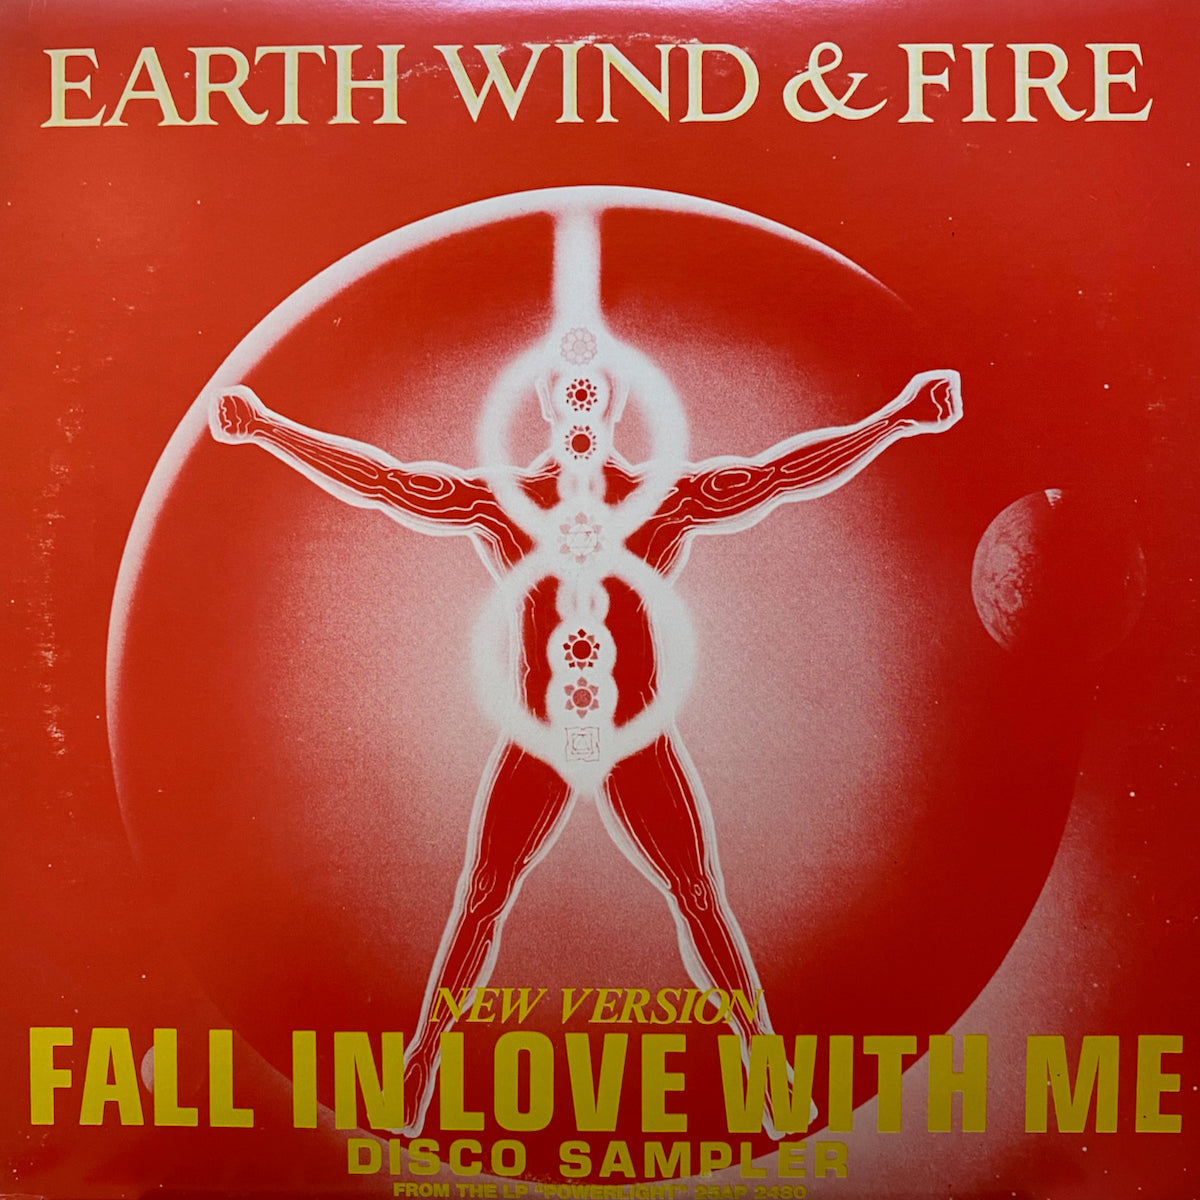 Earth, Wind & Fire / Fall In Love Withe Me / The Speed Of Love 